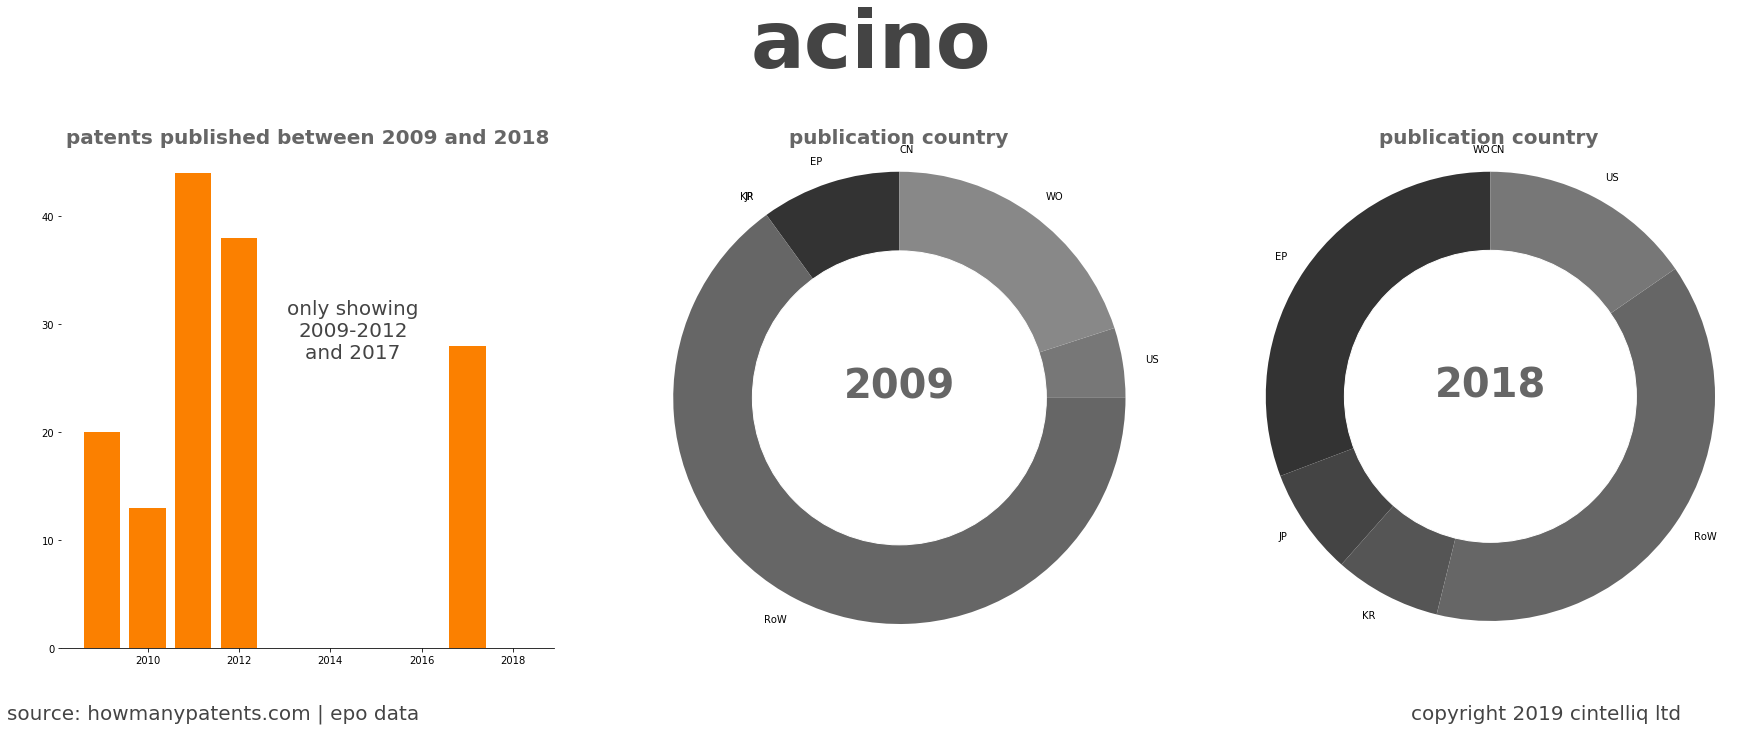 summary of patents for Acino